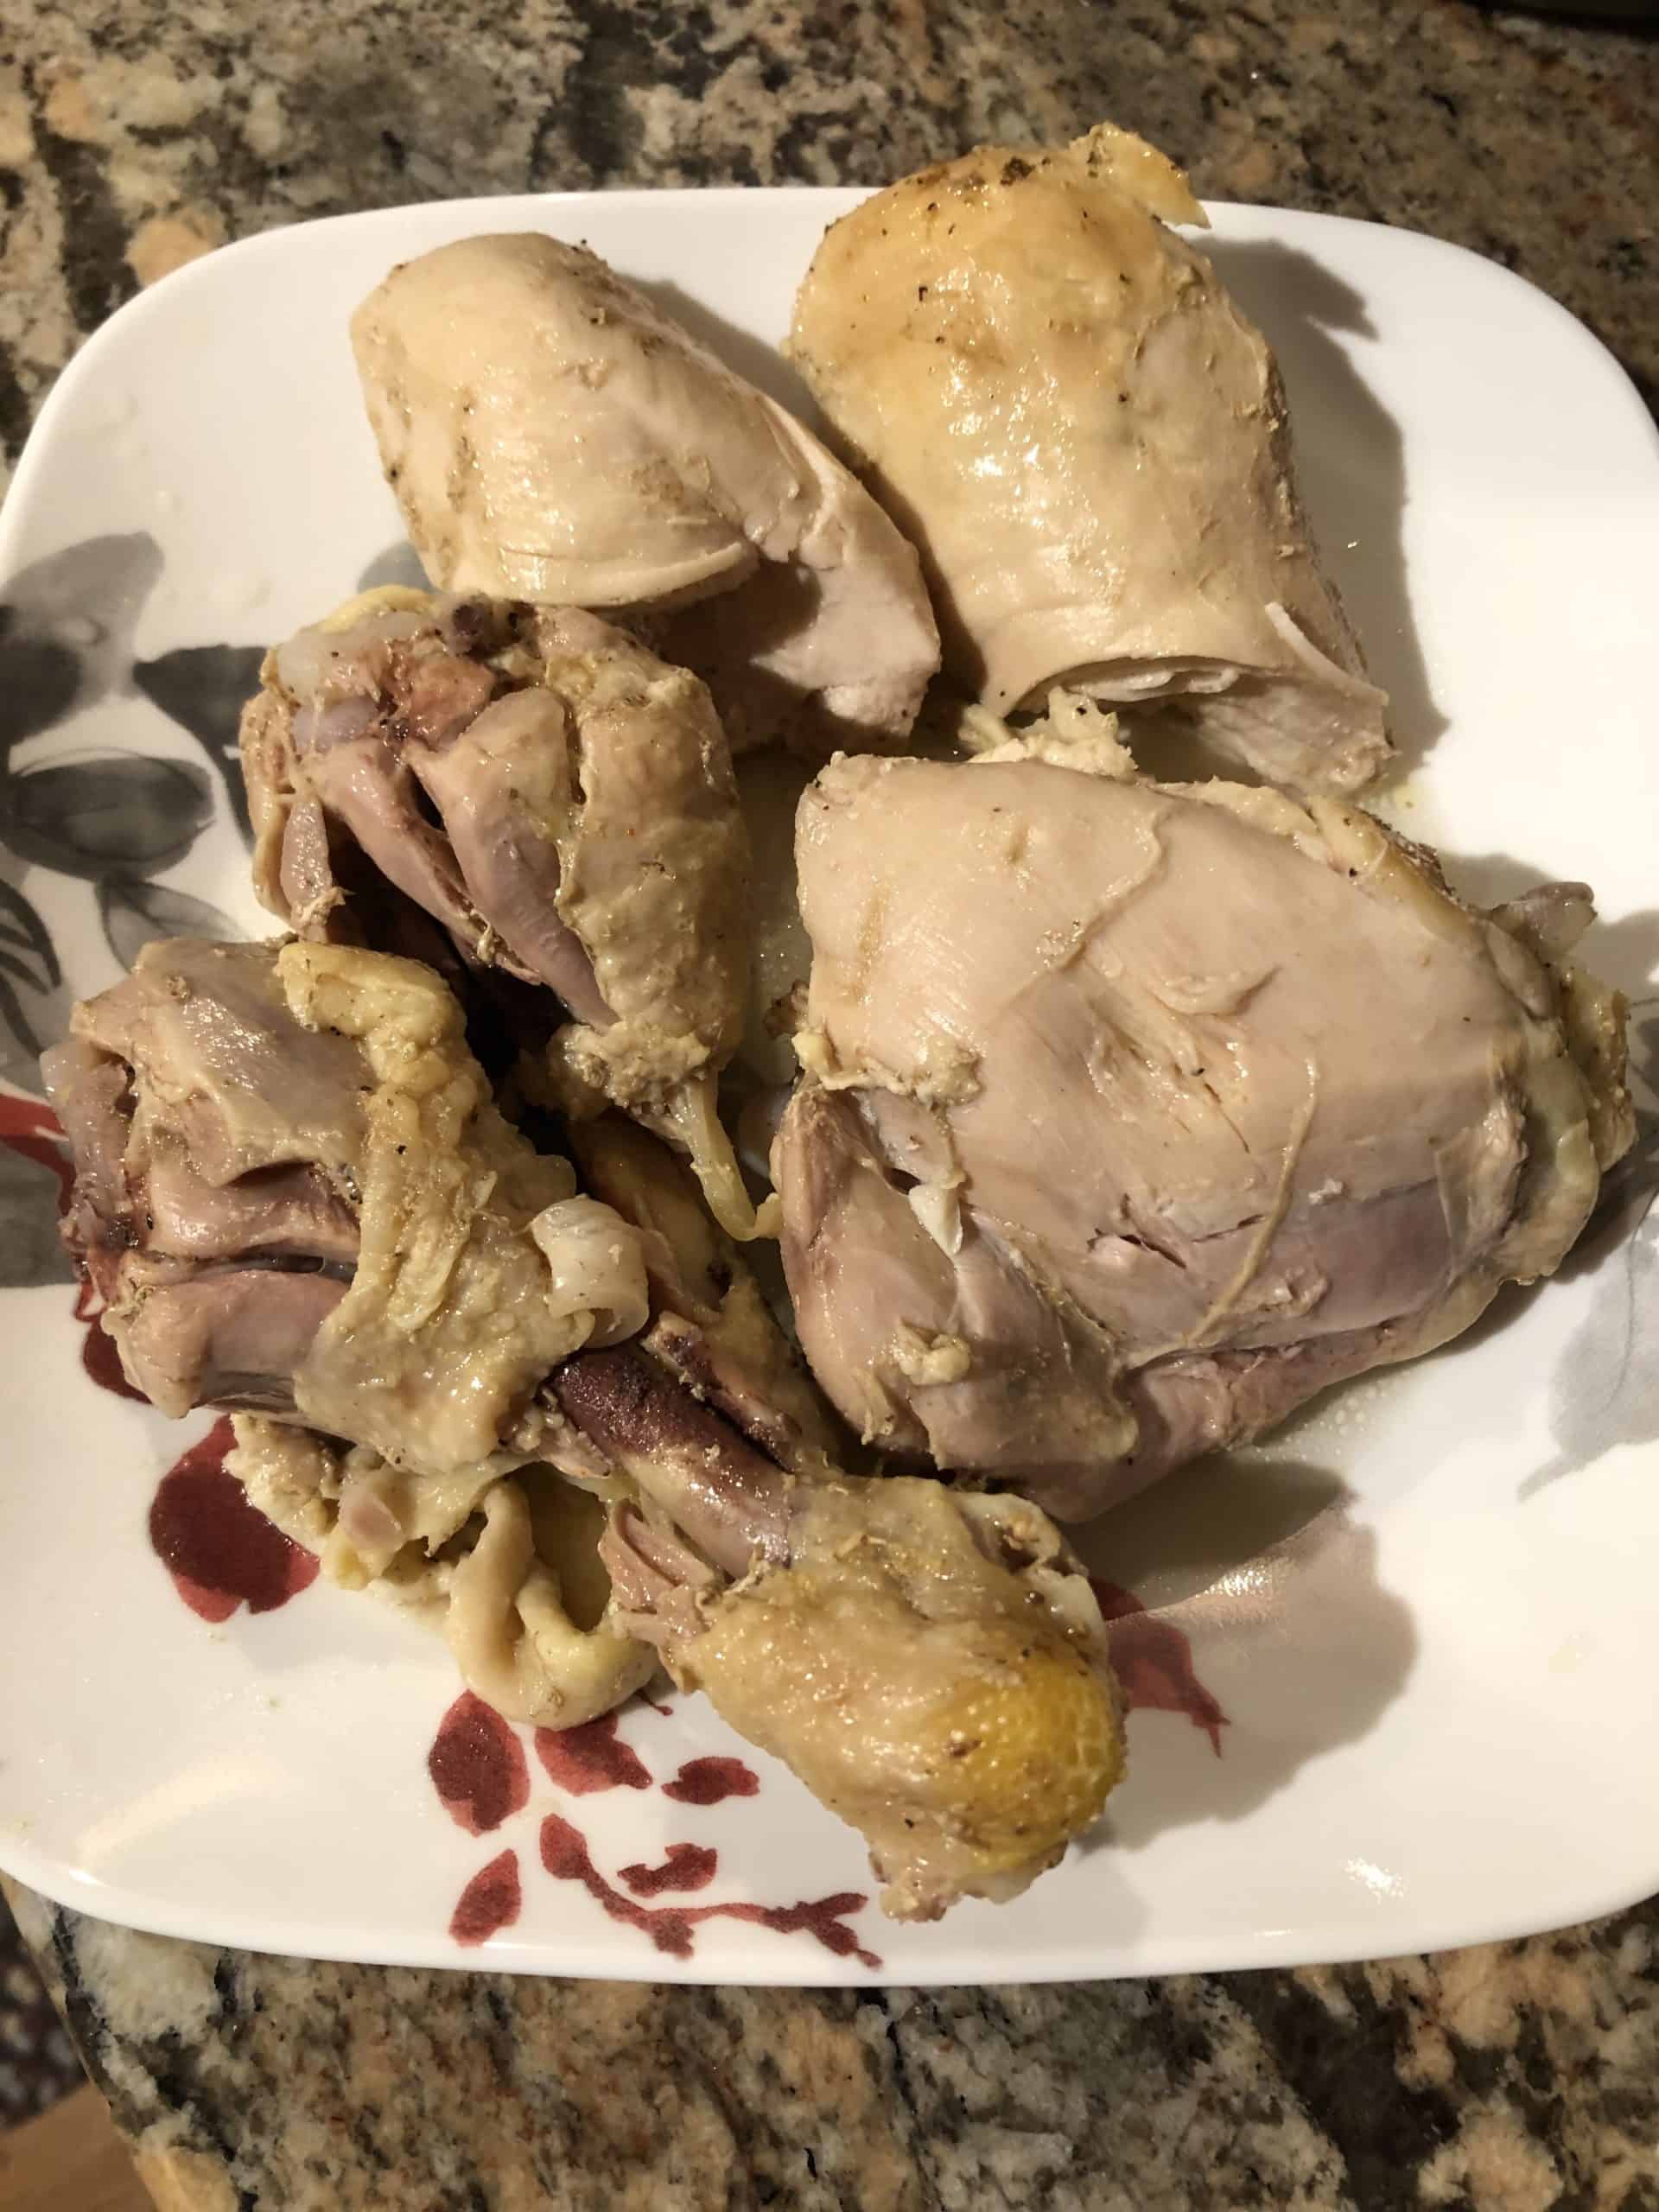 Cooked Chicken Pieces on a plate.